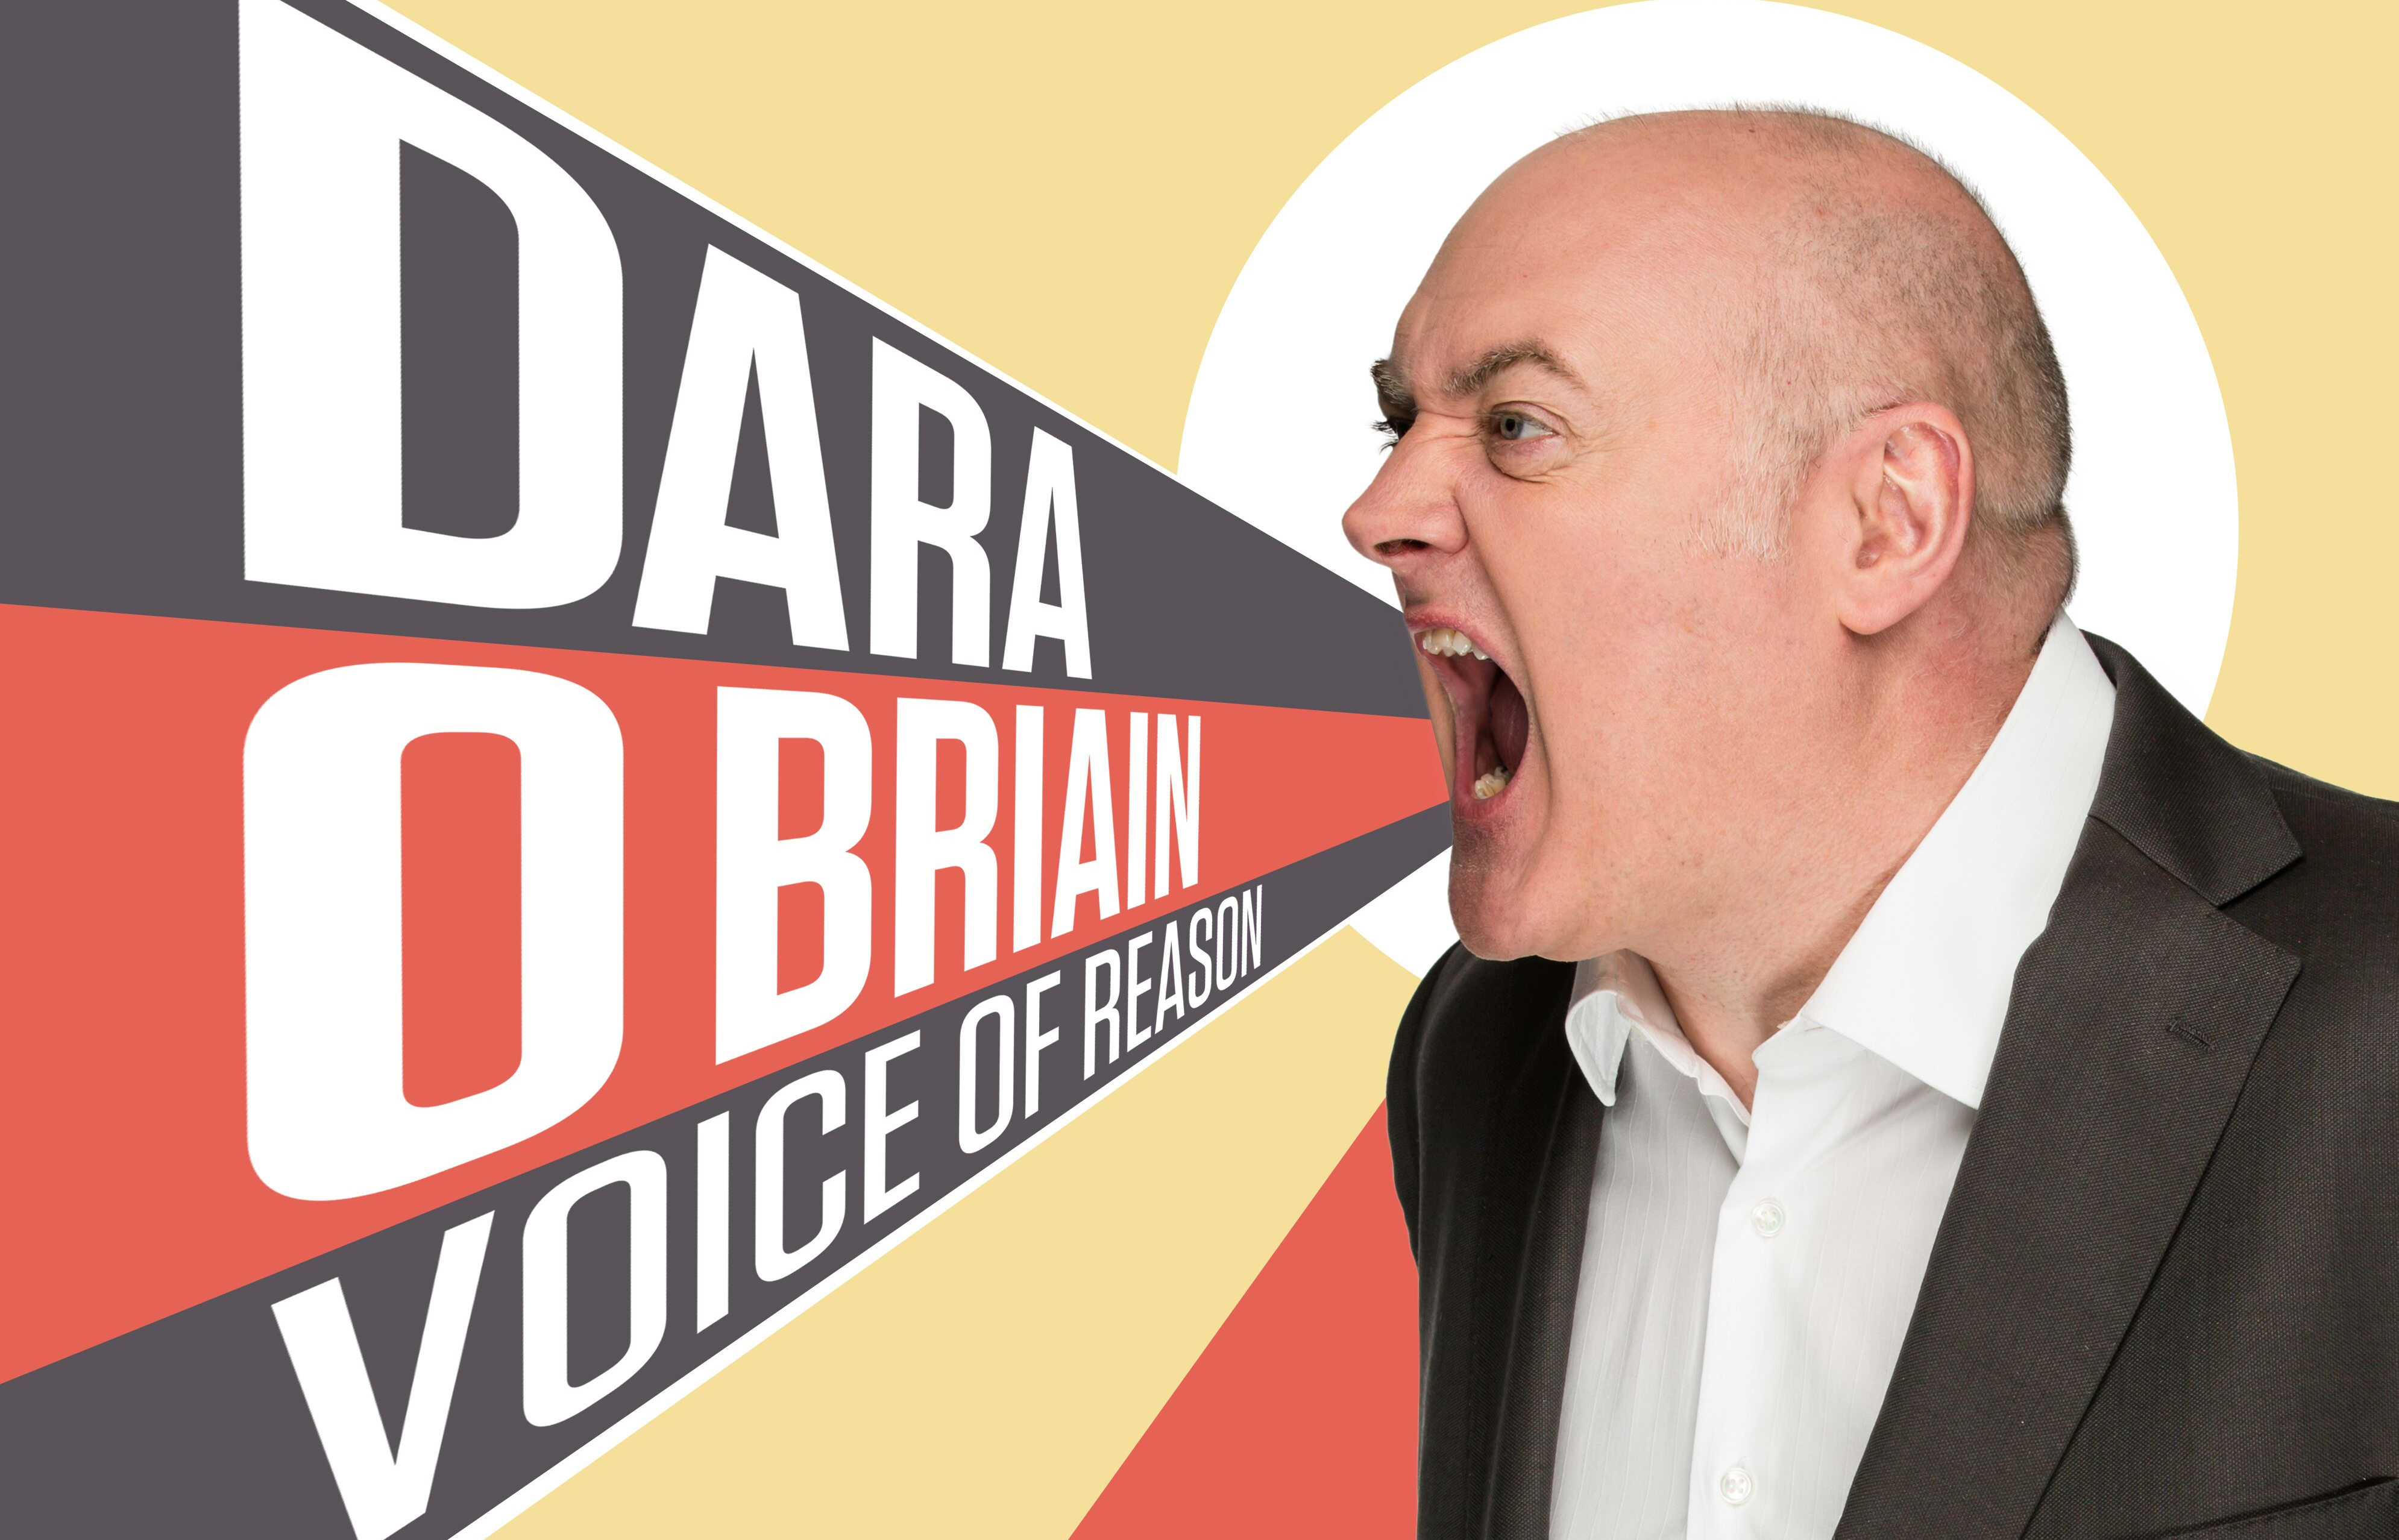 Dara O'Briain is visiting New Zealand on his Voice of Reason tour.